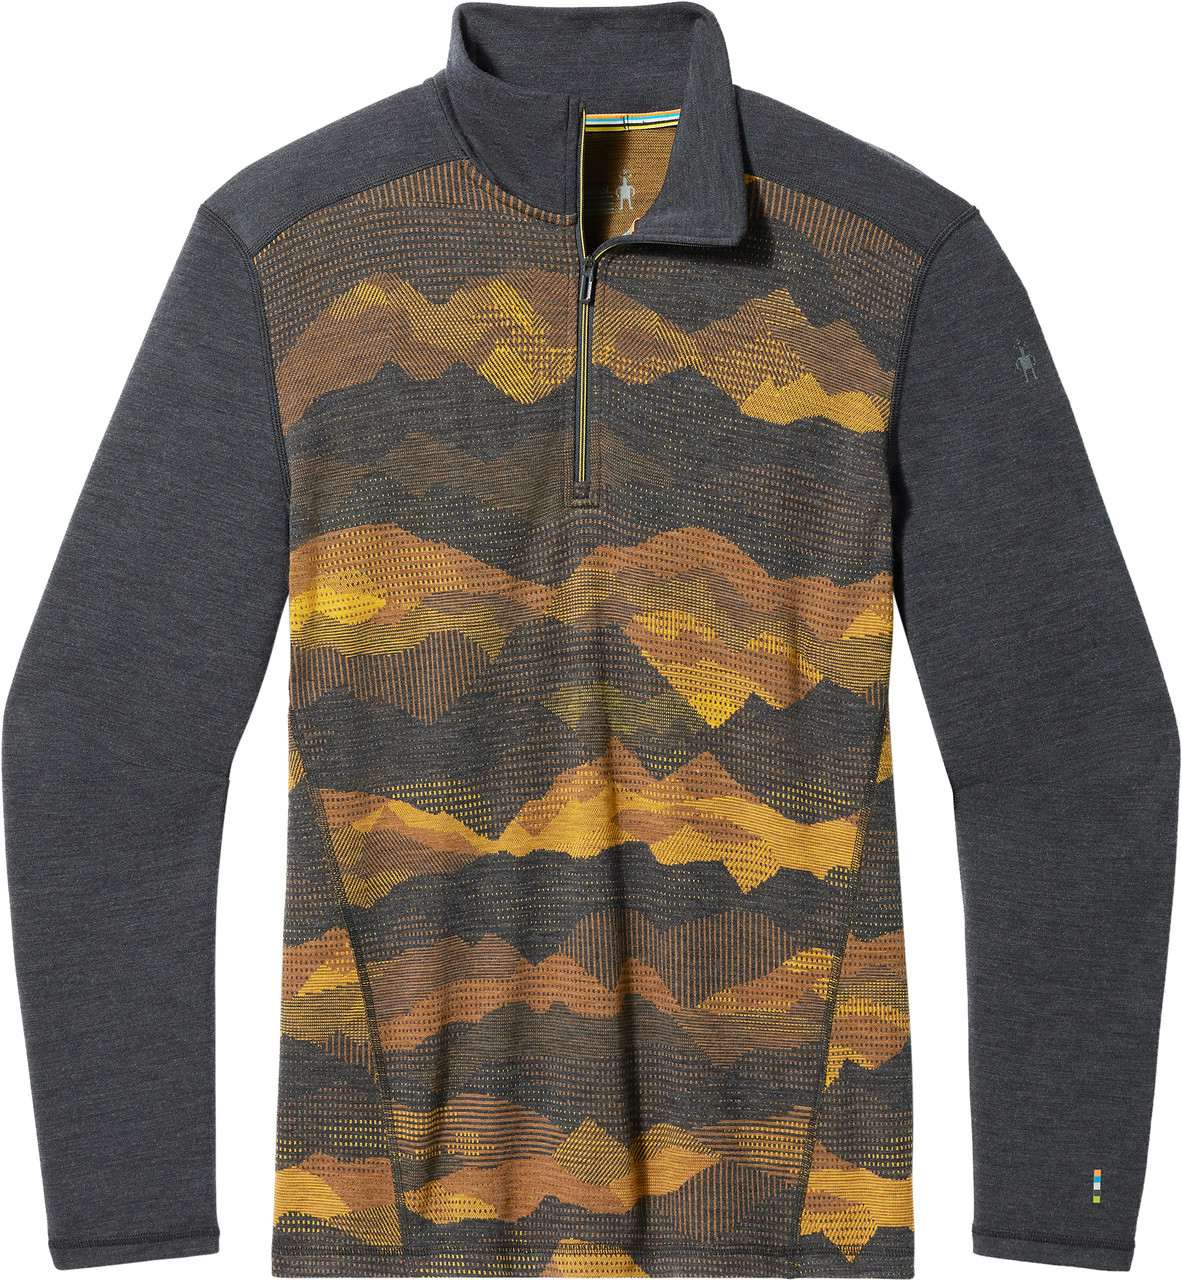 Classic Thermal Merino Base Layer 1/4 Zip Charcoal Mountain Scape